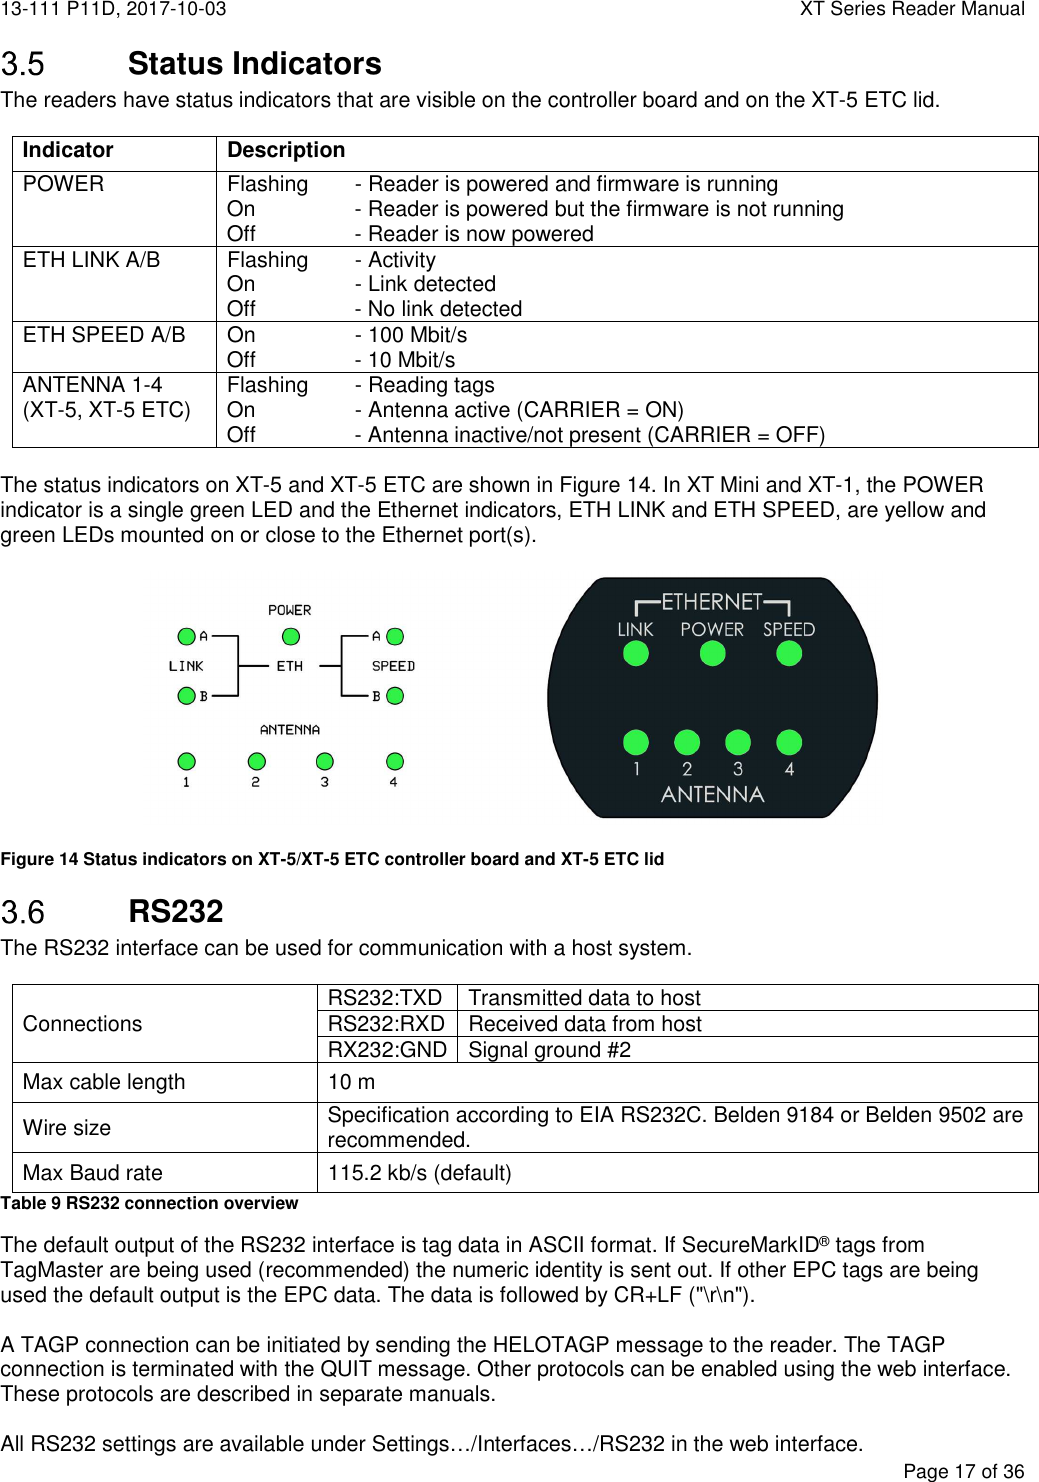 13-111 P11D, 2017-10-03  XT Series Reader Manual  Page 17 of 36   Status Indicators The readers have status indicators that are visible on the controller board and on the XT-5 ETC lid.  Indicator  Description POWER  Flashing   - Reader is powered and firmware is running On  - Reader is powered but the firmware is not running Off  - Reader is now powered ETH LINK A/B  Flashing  - Activity On  - Link detected Off - No link detected ETH SPEED A/B  On  - 100 Mbit/s Off - 10 Mbit/s ANTENNA 1-4 (XT-5, XT-5 ETC)  Flashing  - Reading tags On  - Antenna active (CARRIER = ON) Off - Antenna inactive/not present (CARRIER = OFF)  The status indicators on XT-5 and XT-5 ETC are shown in Figure 14. In XT Mini and XT-1, the POWER indicator is a single green LED and the Ethernet indicators, ETH LINK and ETH SPEED, are yellow and green LEDs mounted on or close to the Ethernet port(s).    Figure 14 Status indicators on XT-5/XT-5 ETC controller board and XT-5 ETC lid  RS232 The RS232 interface can be used for communication with a host system.  Connections RS232:TXD Transmitted data to host RS232:RXD Received data from host RX232:GND Signal ground #2 Max cable length  10 m Wire size  Specification according to EIA RS232C. Belden 9184 or Belden 9502 are recommended. Max Baud rate  115.2 kb/s (default) Table 9 RS232 connection overview The default output of the RS232 interface is tag data in ASCII format. If SecureMarkID® tags from TagMaster are being used (recommended) the numeric identity is sent out. If other EPC tags are being used the default output is the EPC data. The data is followed by CR+LF (&quot;\r\n&quot;).  A TAGP connection can be initiated by sending the HELOTAGP message to the reader. The TAGP connection is terminated with the QUIT message. Other protocols can be enabled using the web interface. These protocols are described in separate manuals.  All RS232 settings are available under Settings…/Interfaces…/RS232 in the web interface. 